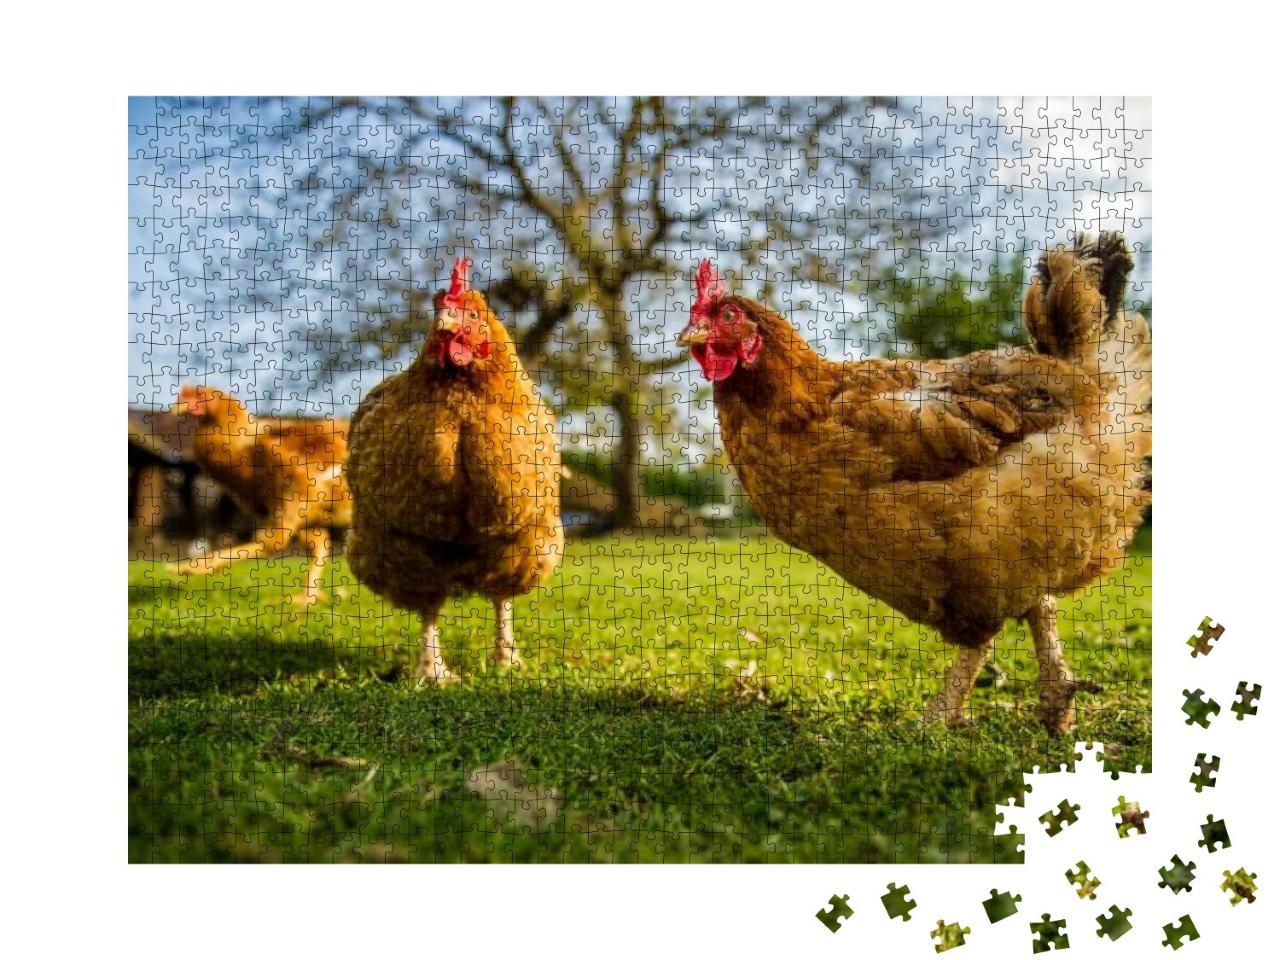 Free Range Chicken on a Traditional Poultry Farm... Jigsaw Puzzle with 1000 pieces